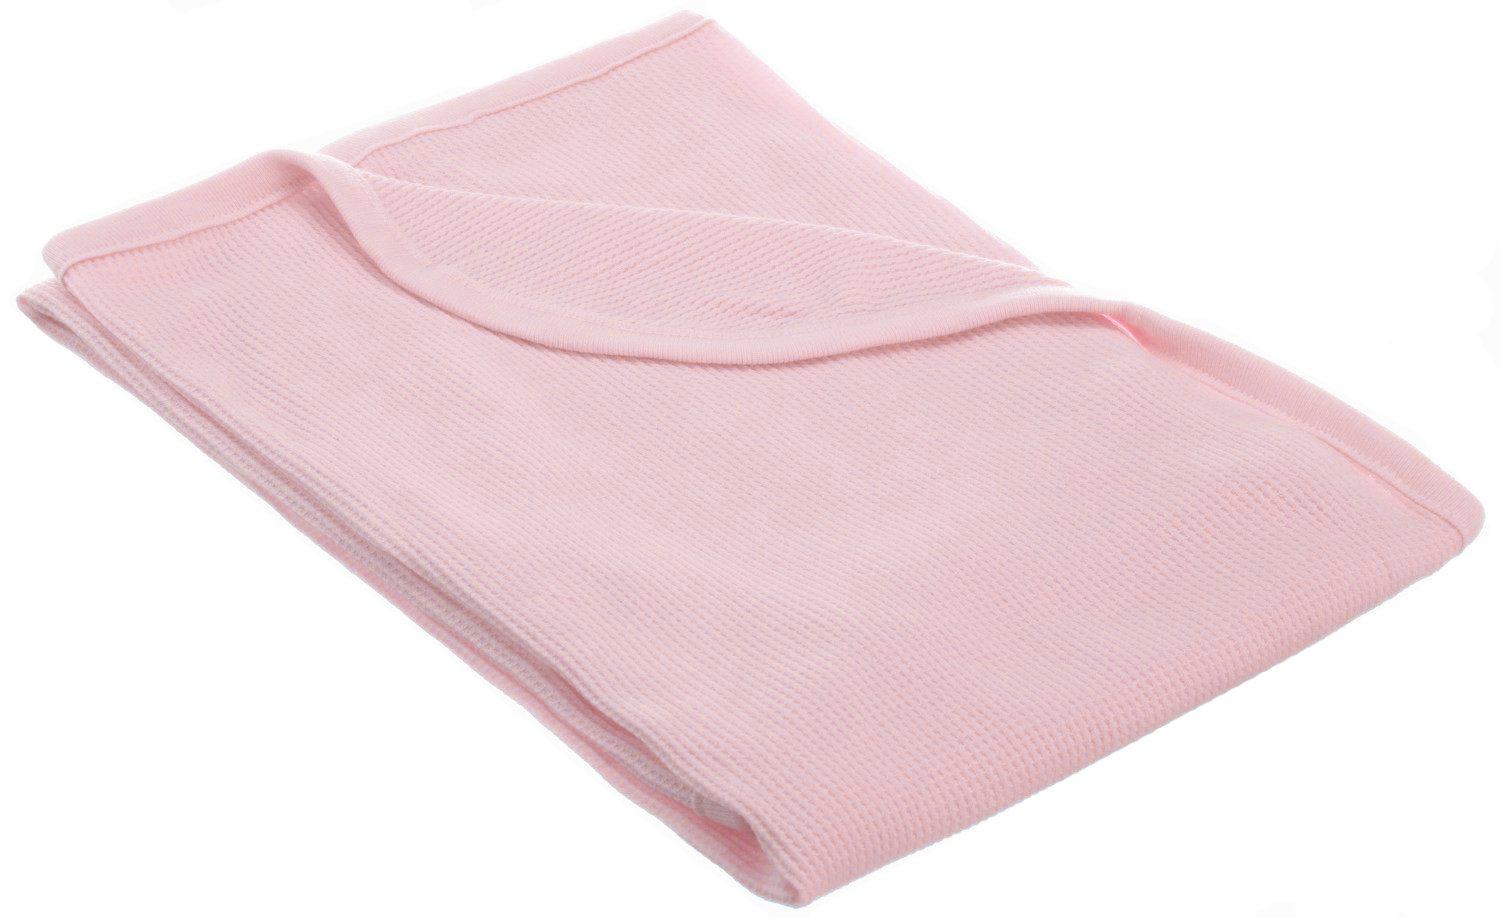 Thermal Baby Blanket With Satin Trim